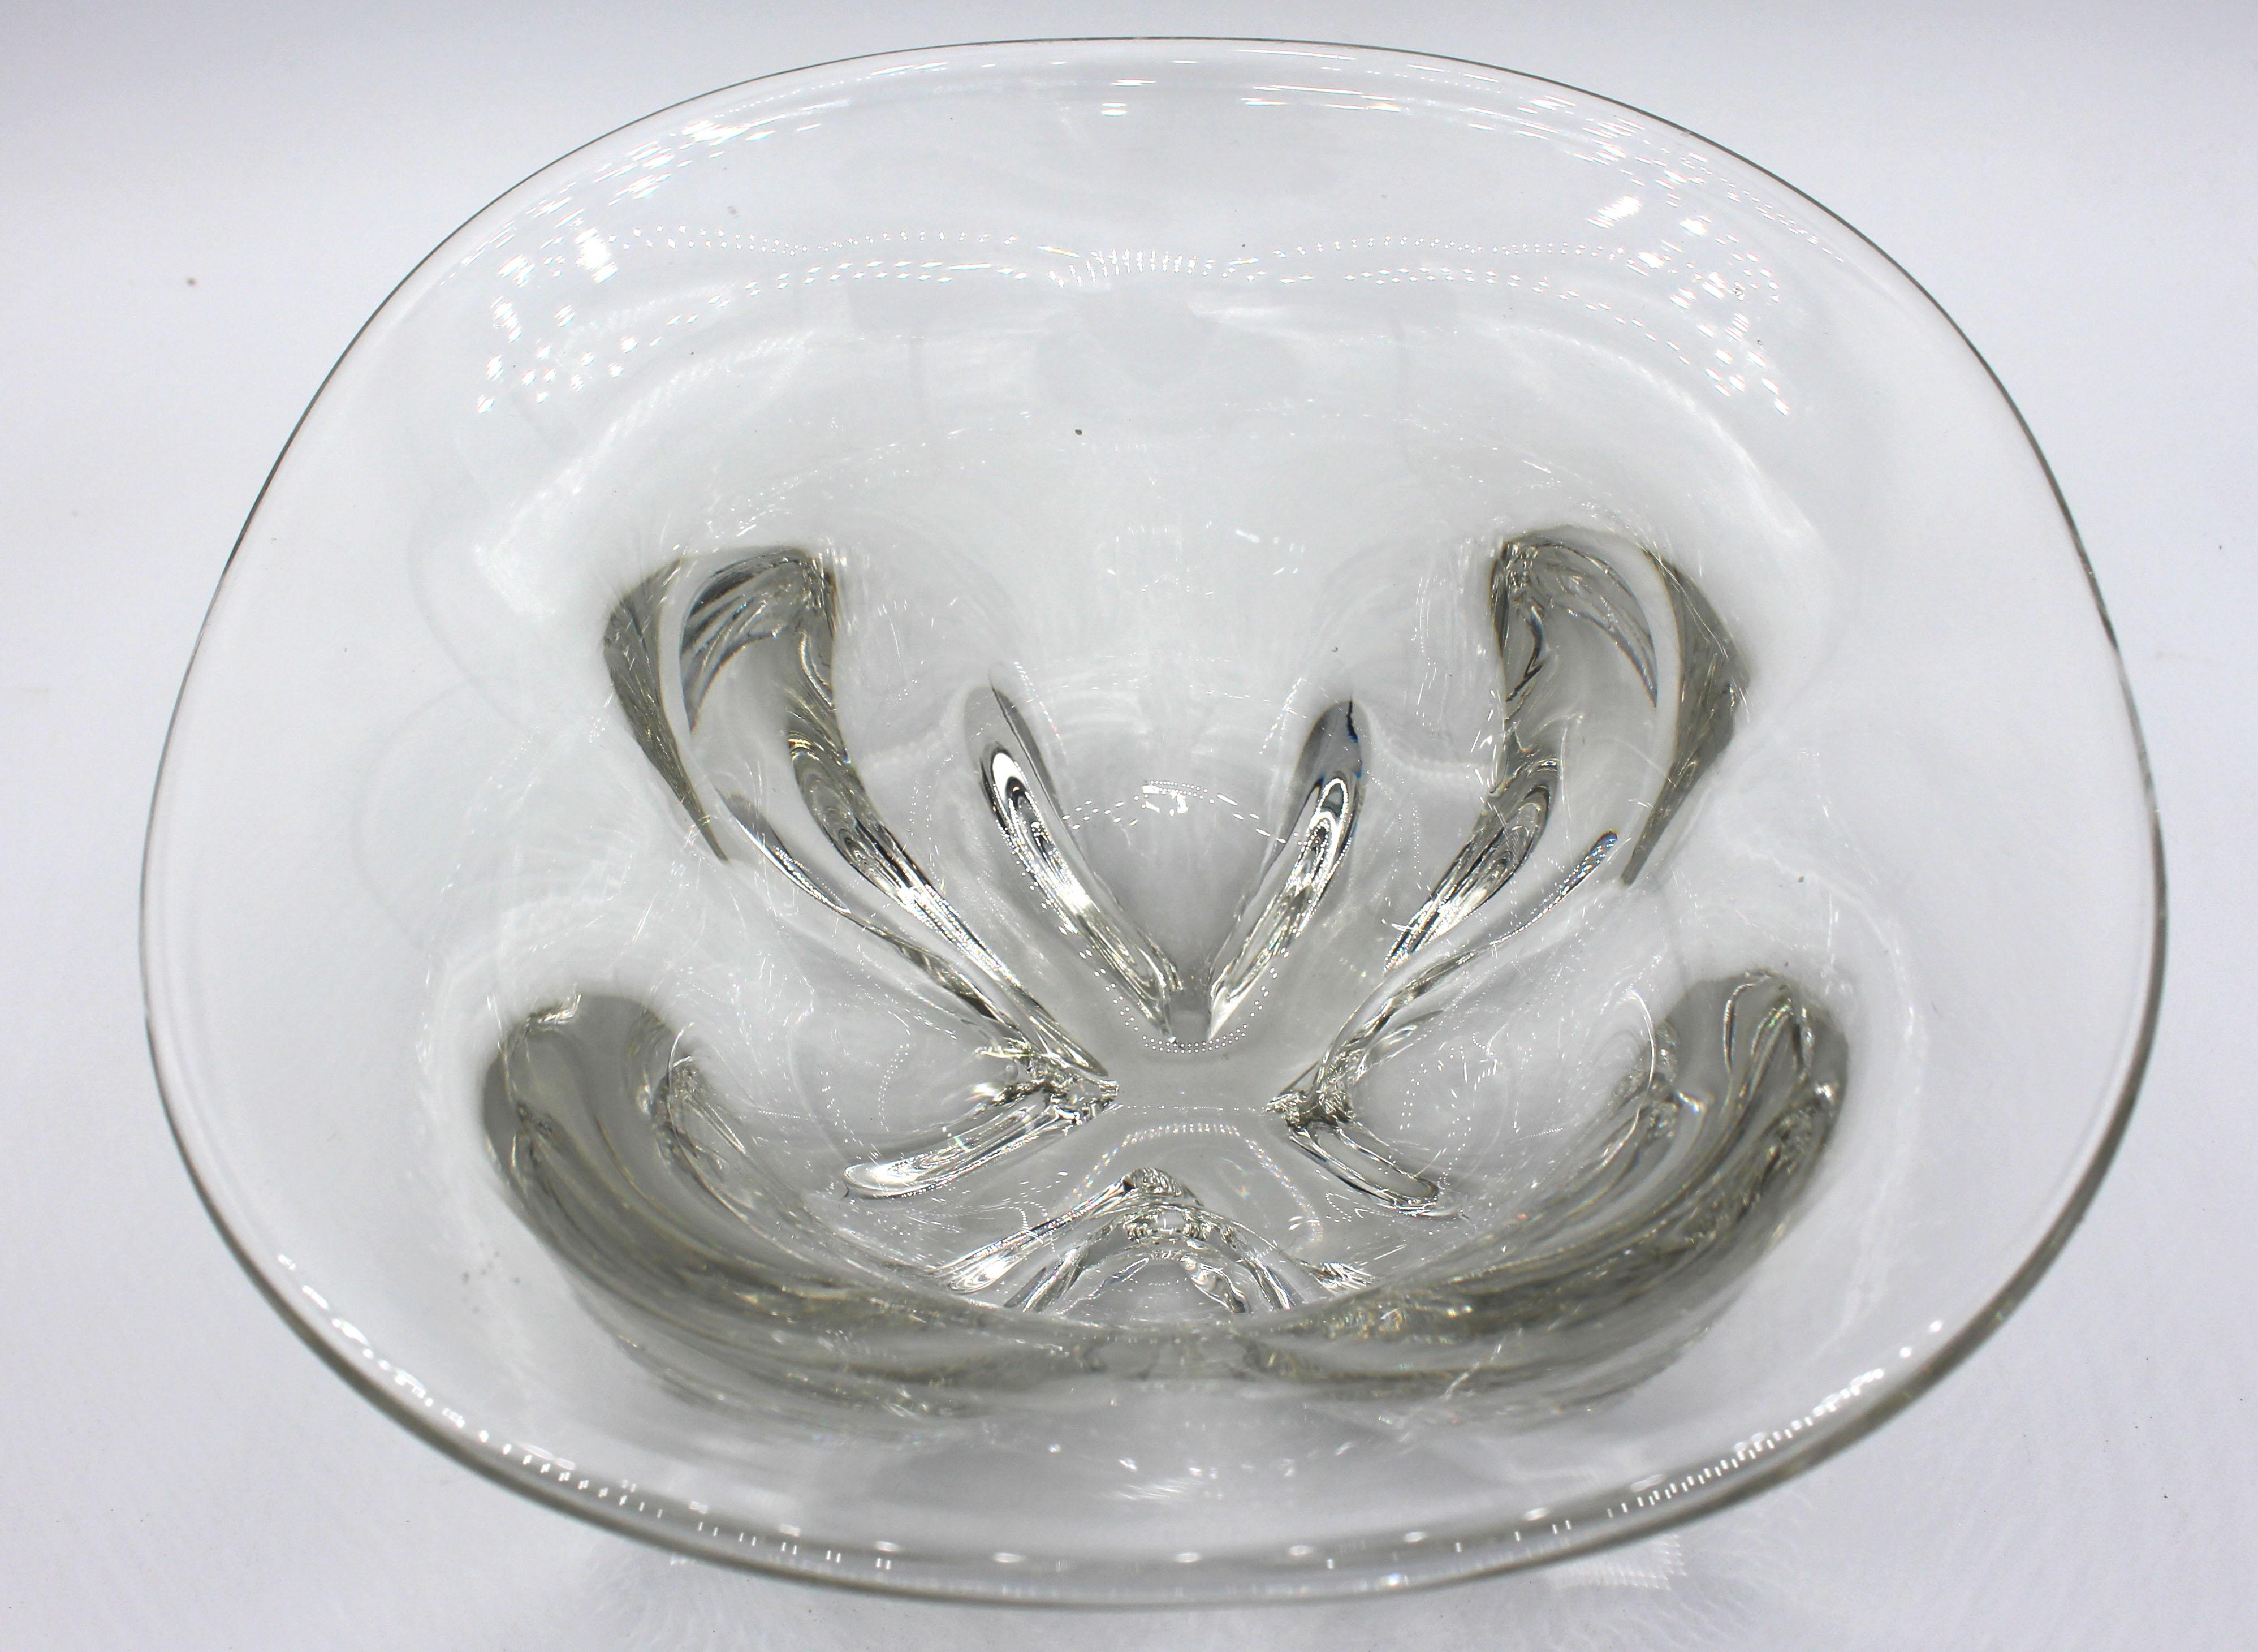 Crystal bowl attributed to Orrefors, circa 1970s, Sweden. Hand made. Mid century modern design. Square top slopes to the four section pinched form base. Overall good condition.
8.75